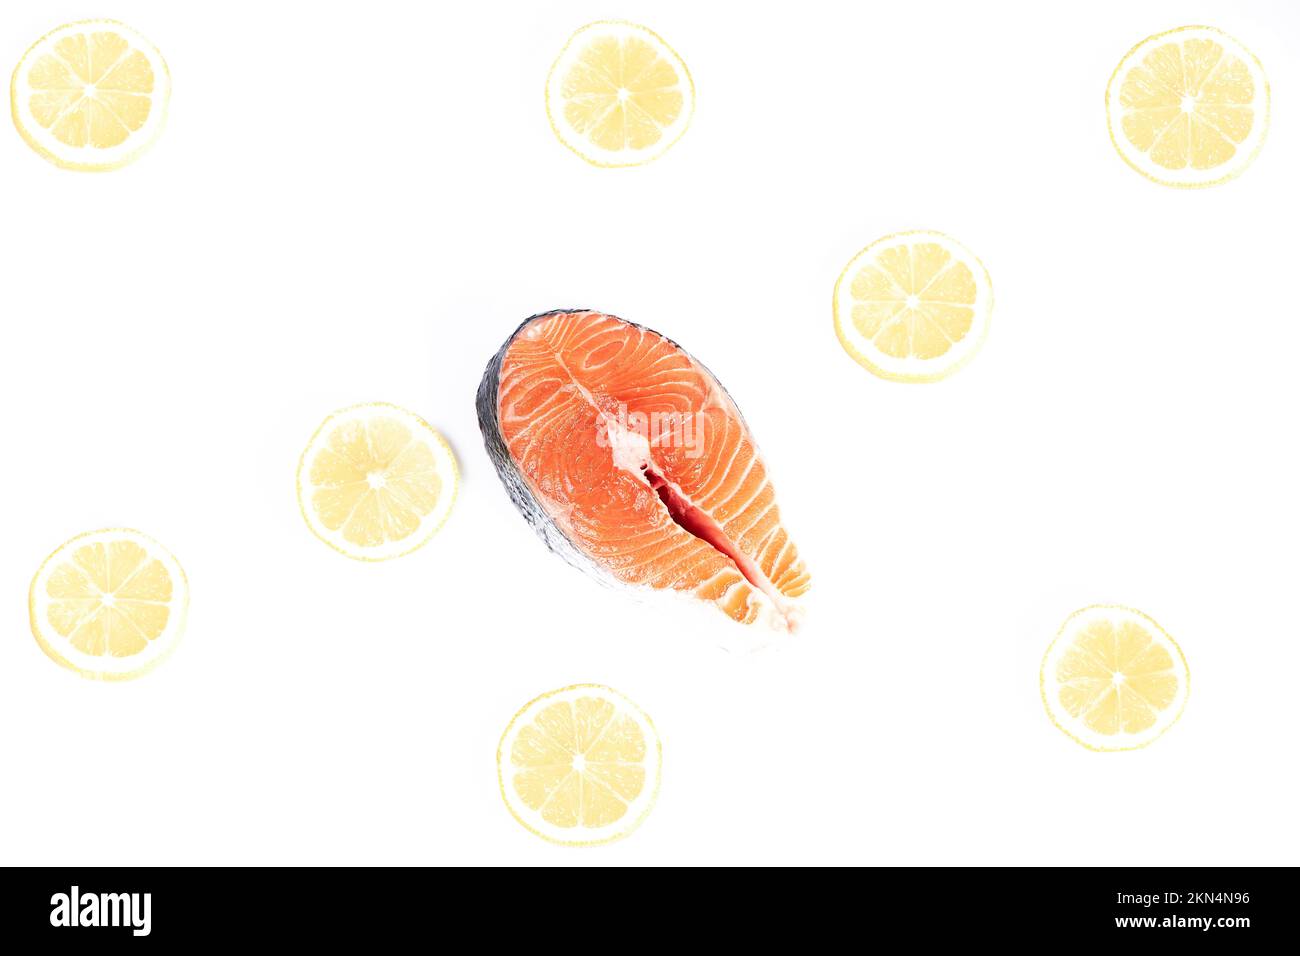 Salmon, slice of fresh raw fish together with lemon slices, isolated on white background. Healthy food Stock Photo